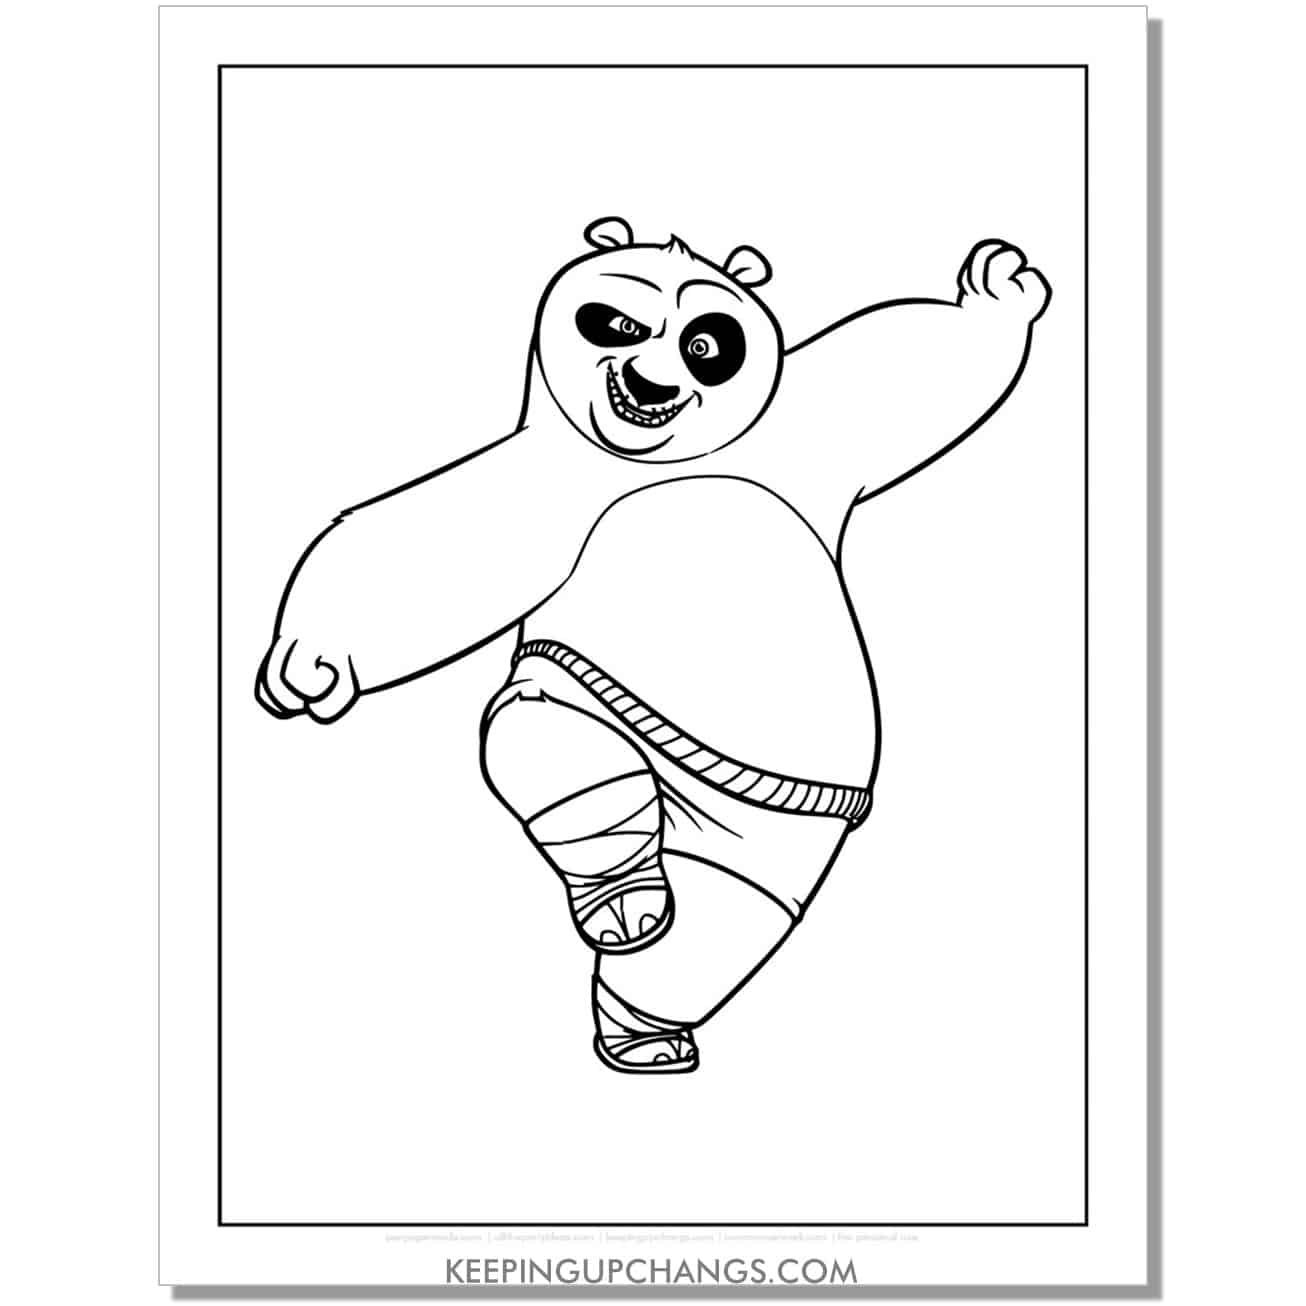 free po in crane stance coloring page.